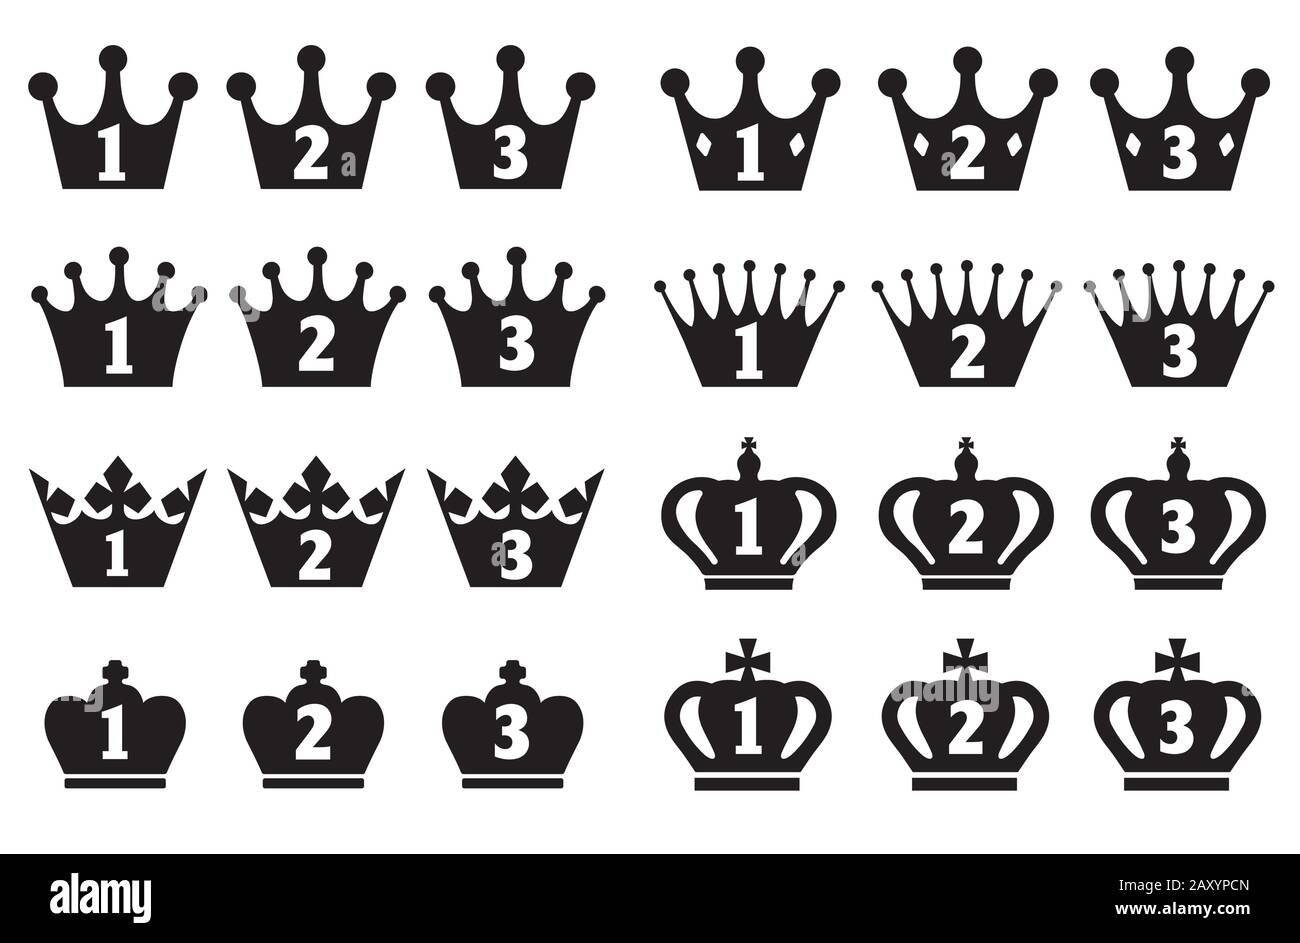 Ranking crown icon set ( from 1st place to 3rd place / black ) Stock Vector